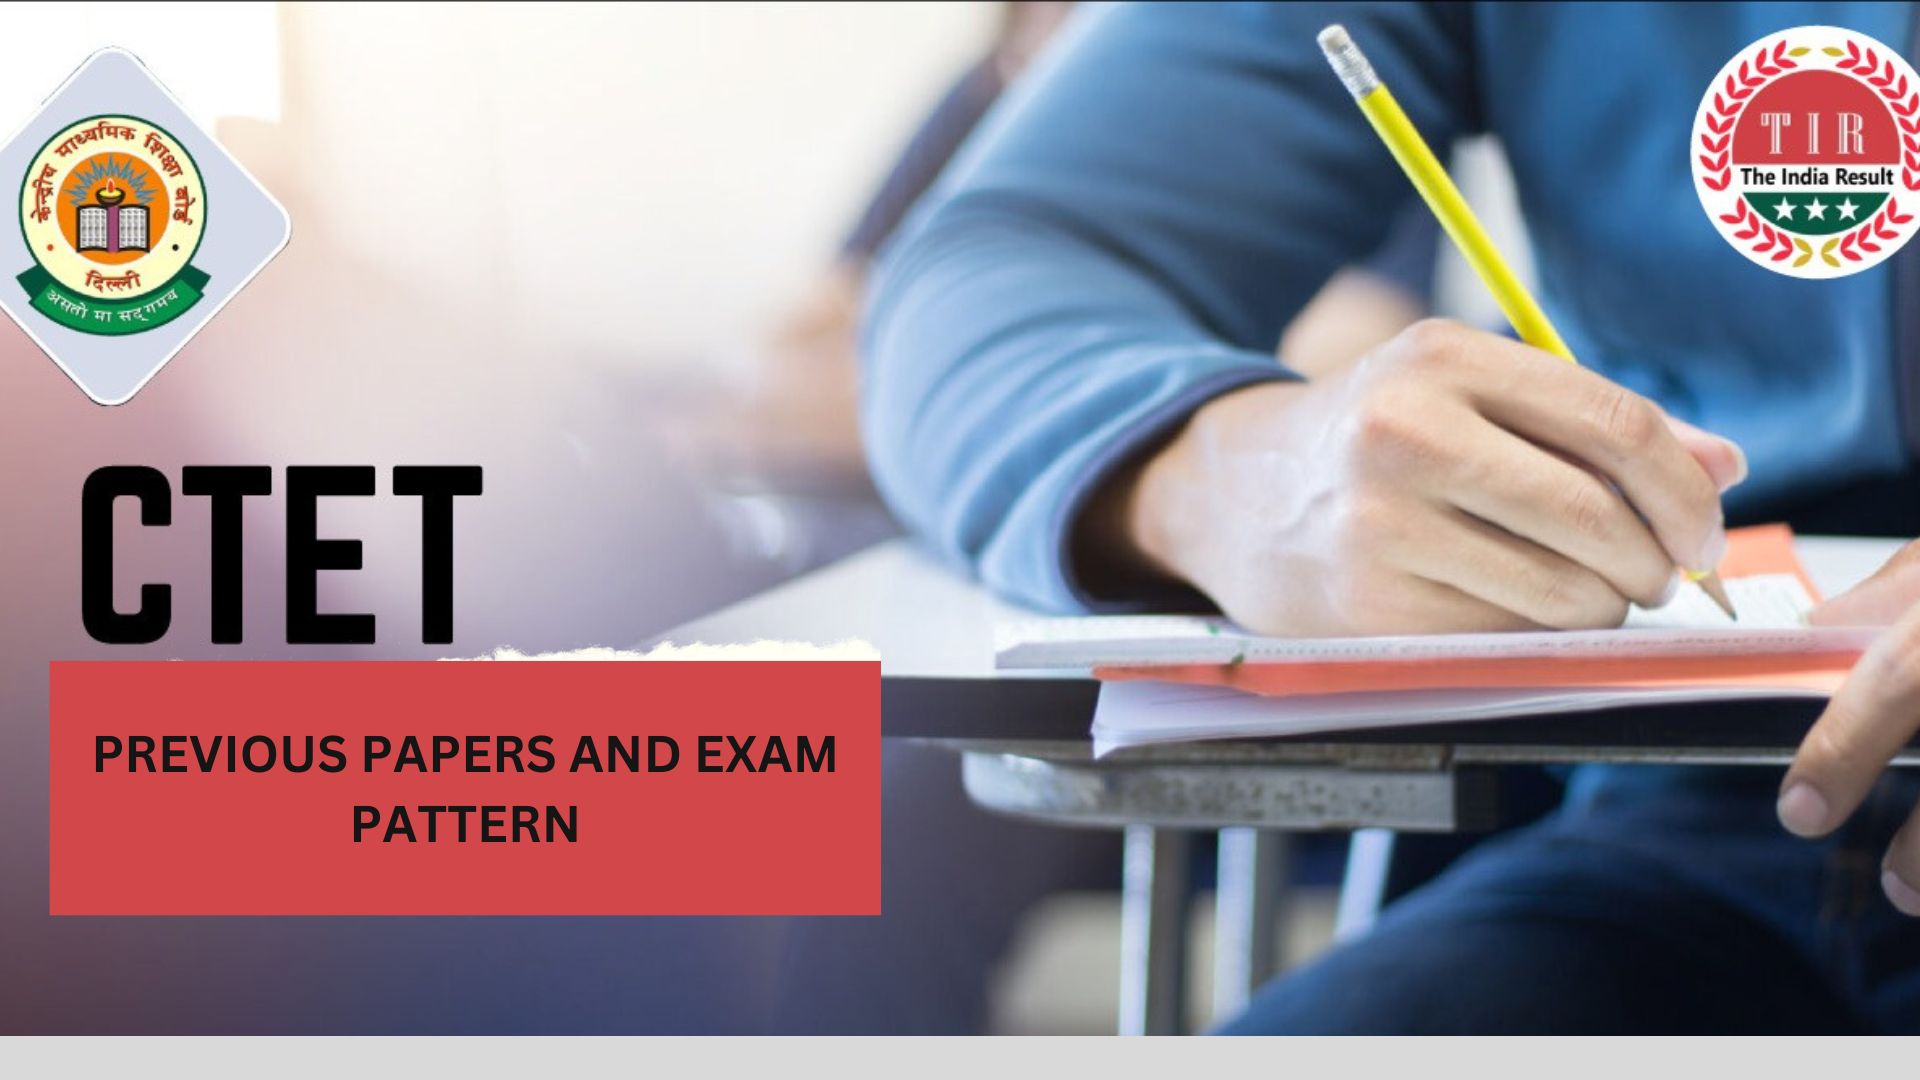 Previous year papers and exam pattern for CTET